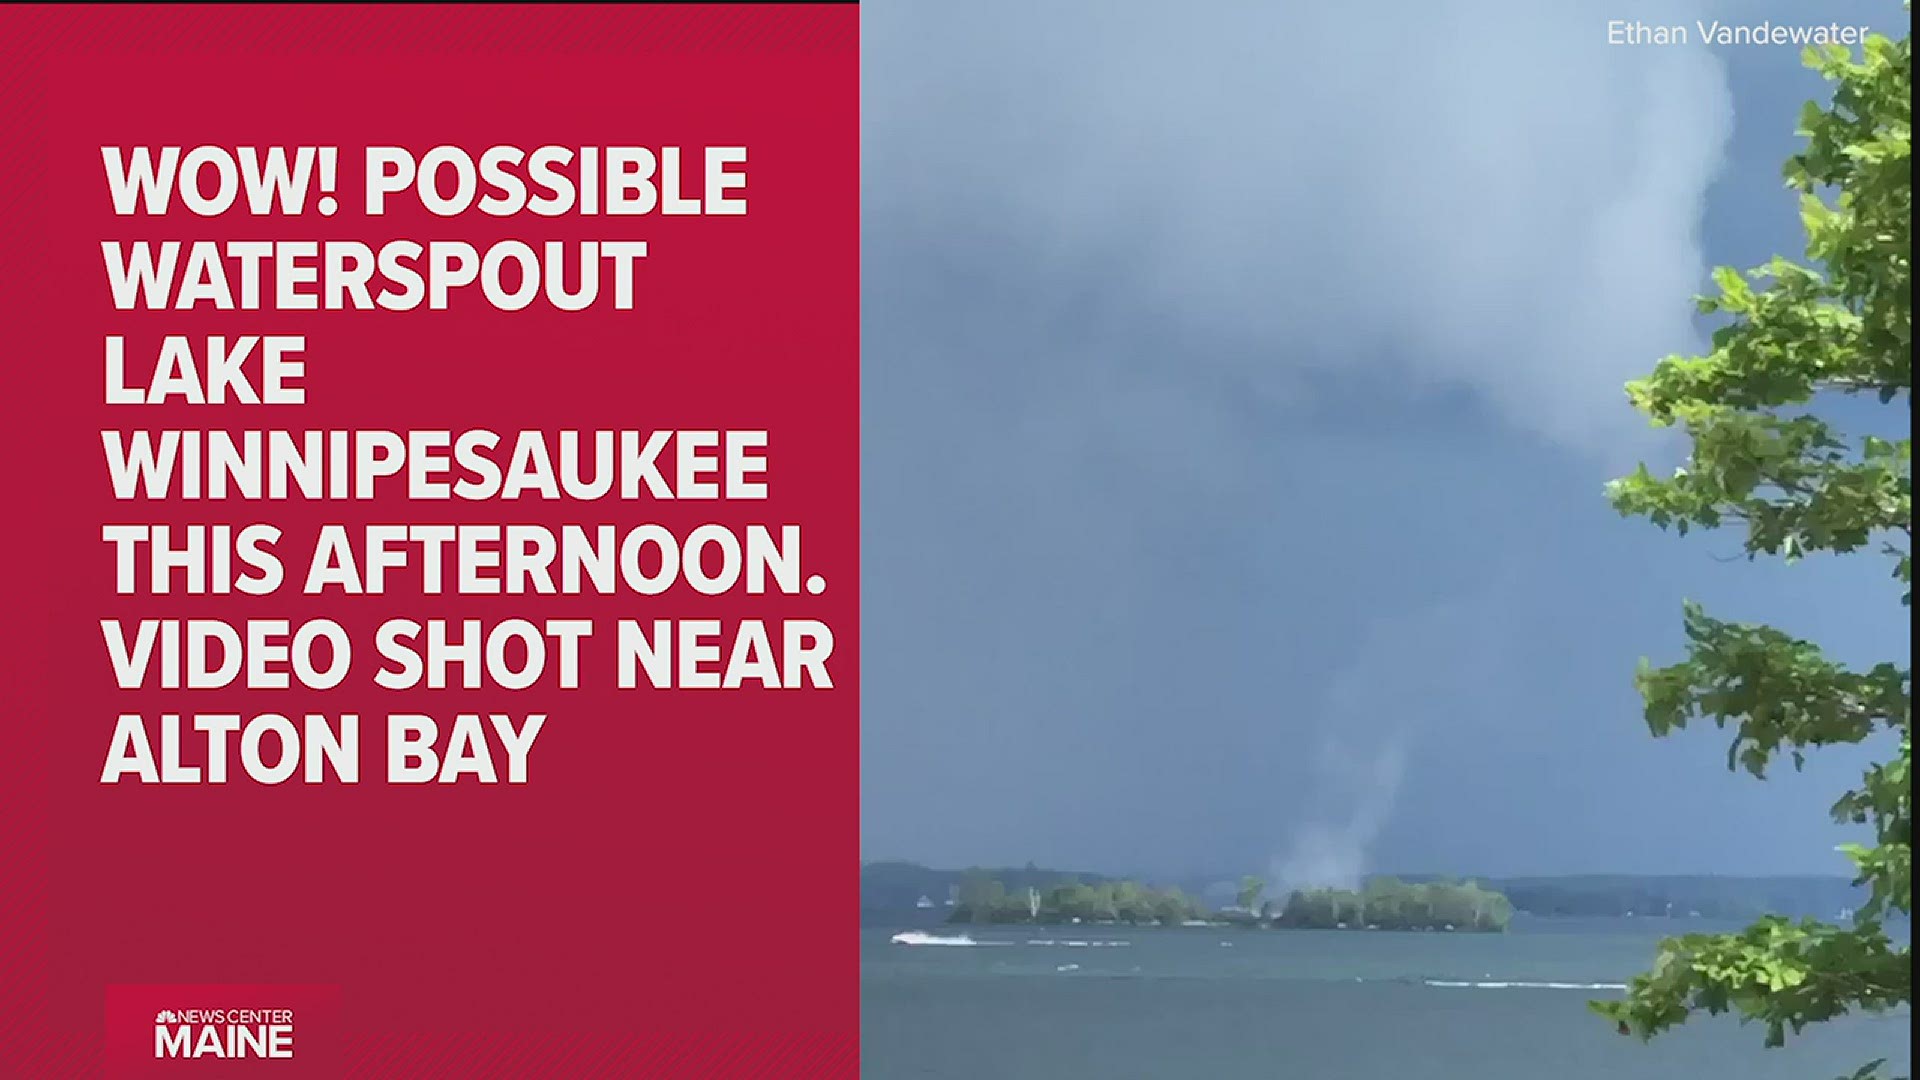 Great shot of a possible waterspout on Lake Winnipesaukee during today's New Hampshire tornado warning